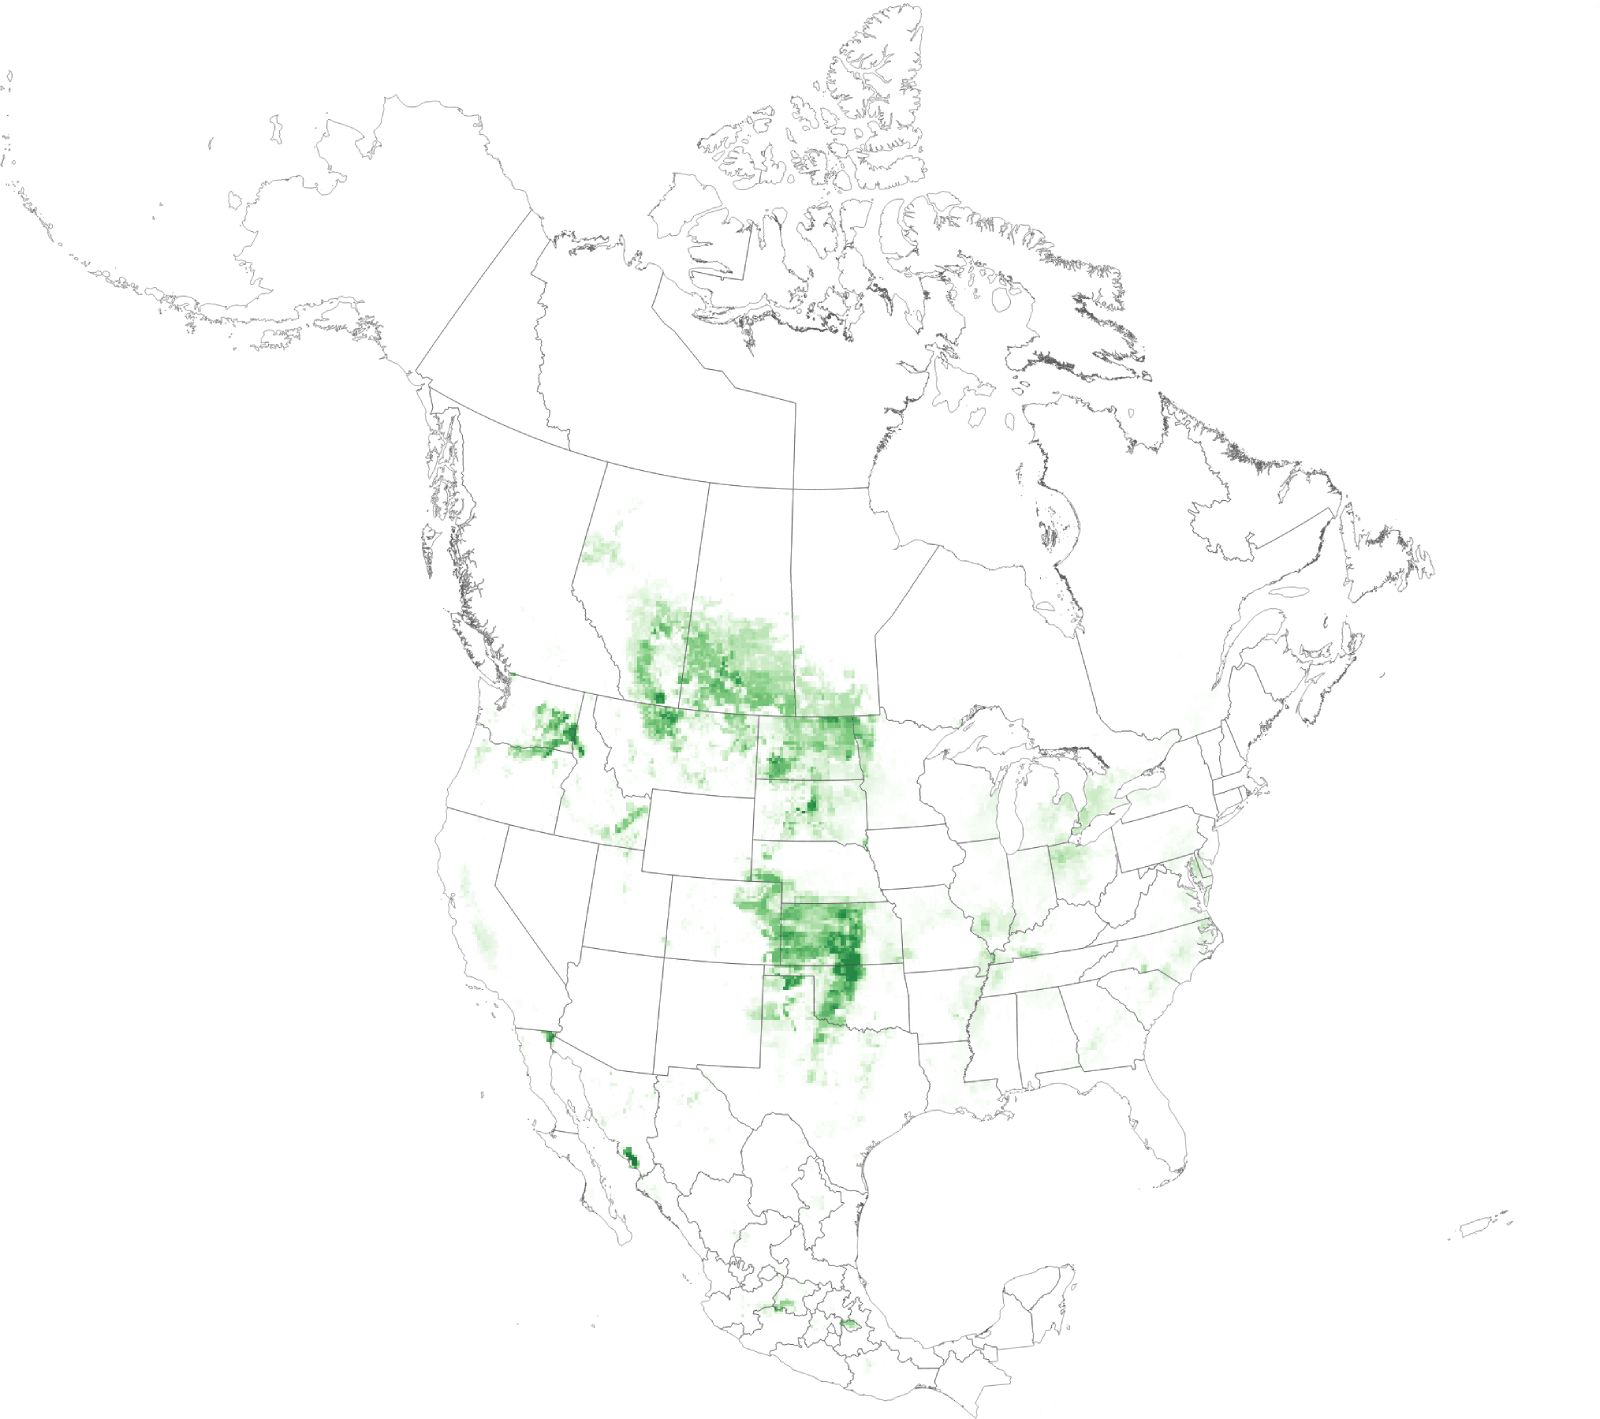 A map showing the locations of wheat productions in the US and Canada